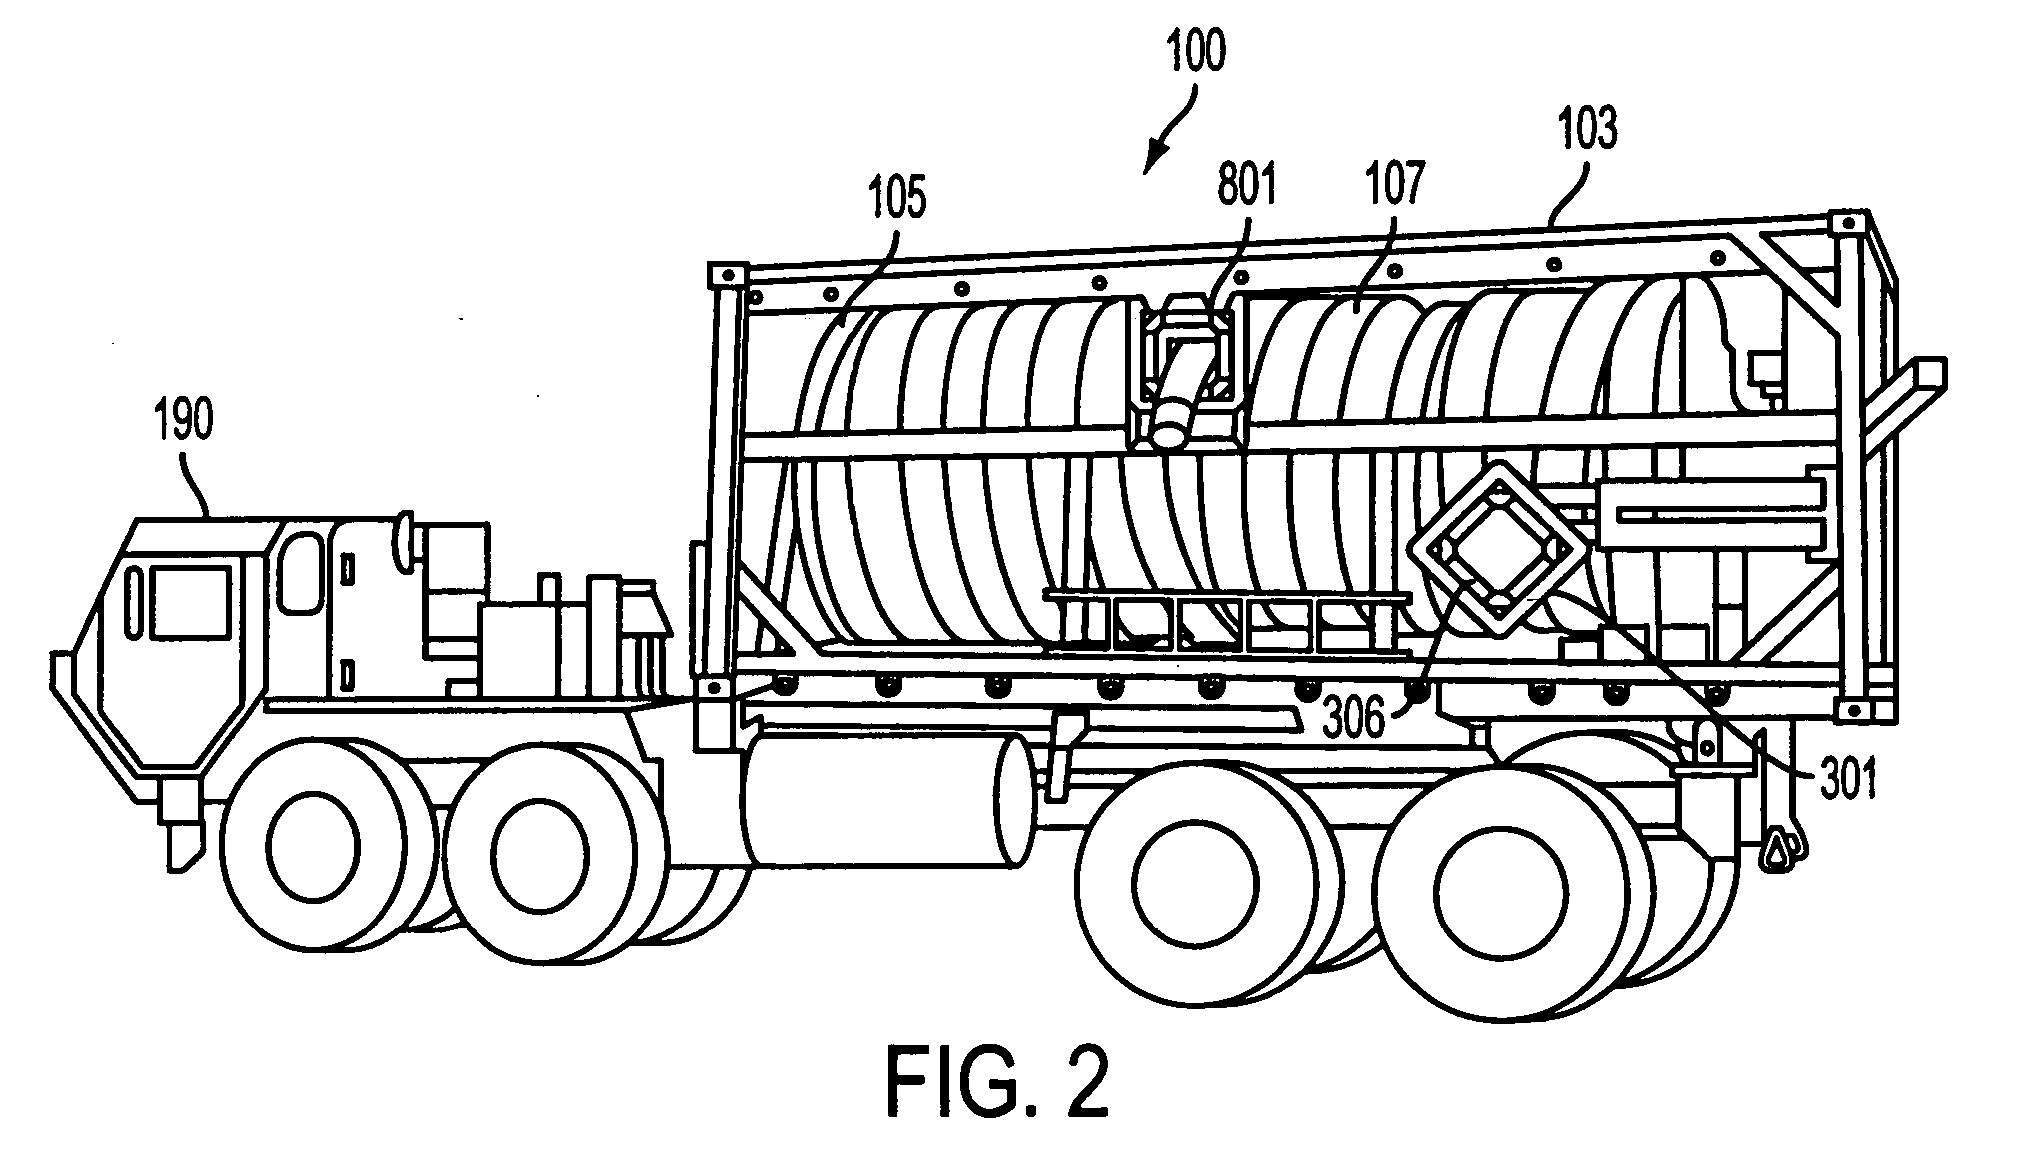 Systems and methods for the rapid deployment of piping